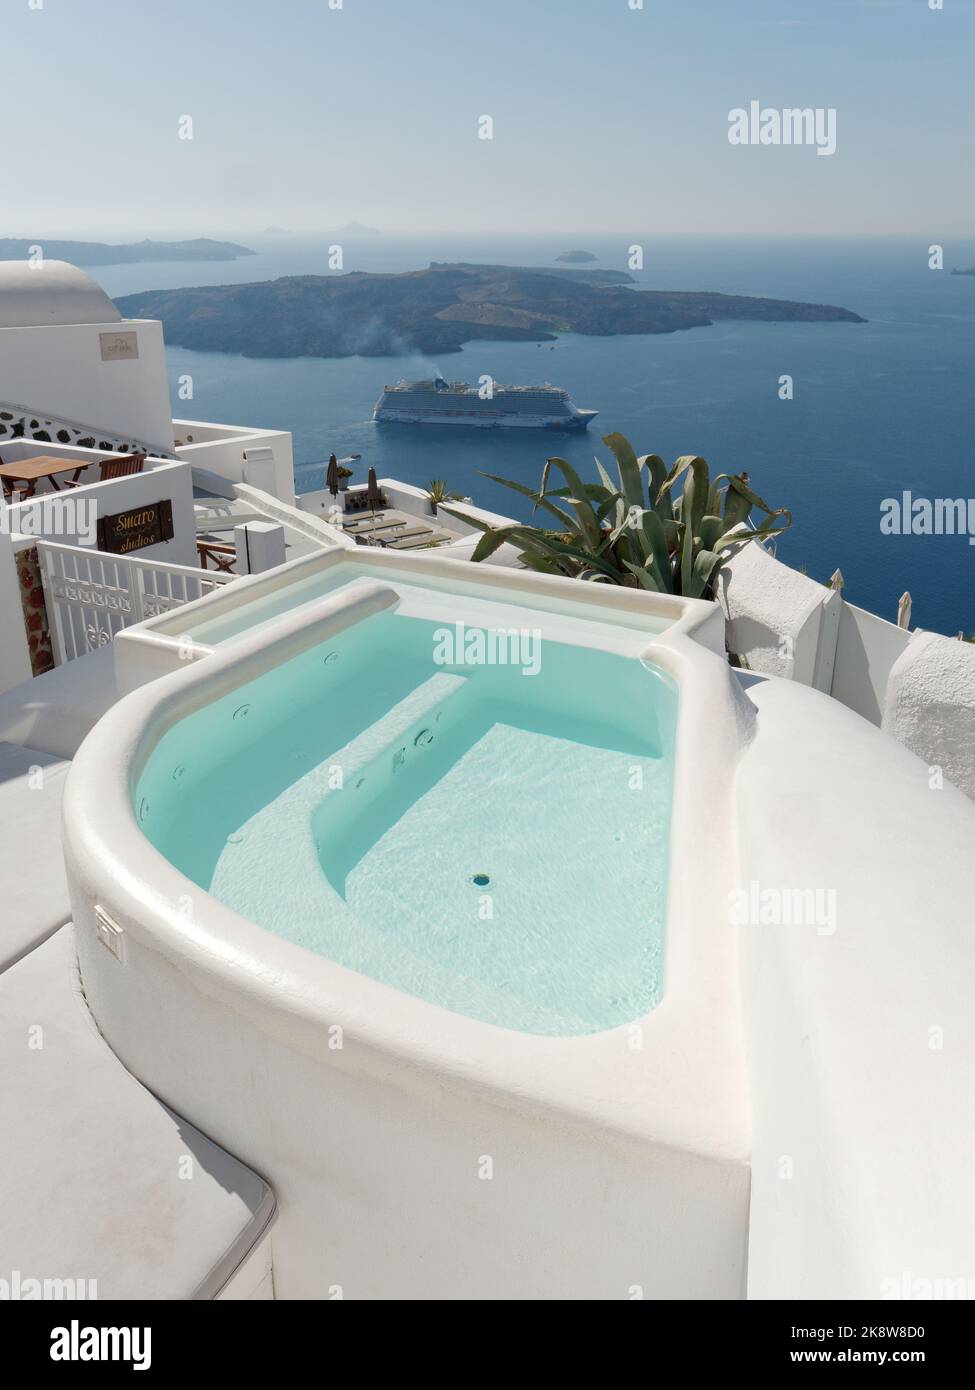 Plunge pool with Caldera views including a cruise ship. Greek Cyclades island of Santorini in the Aegean Sea Stock Photo